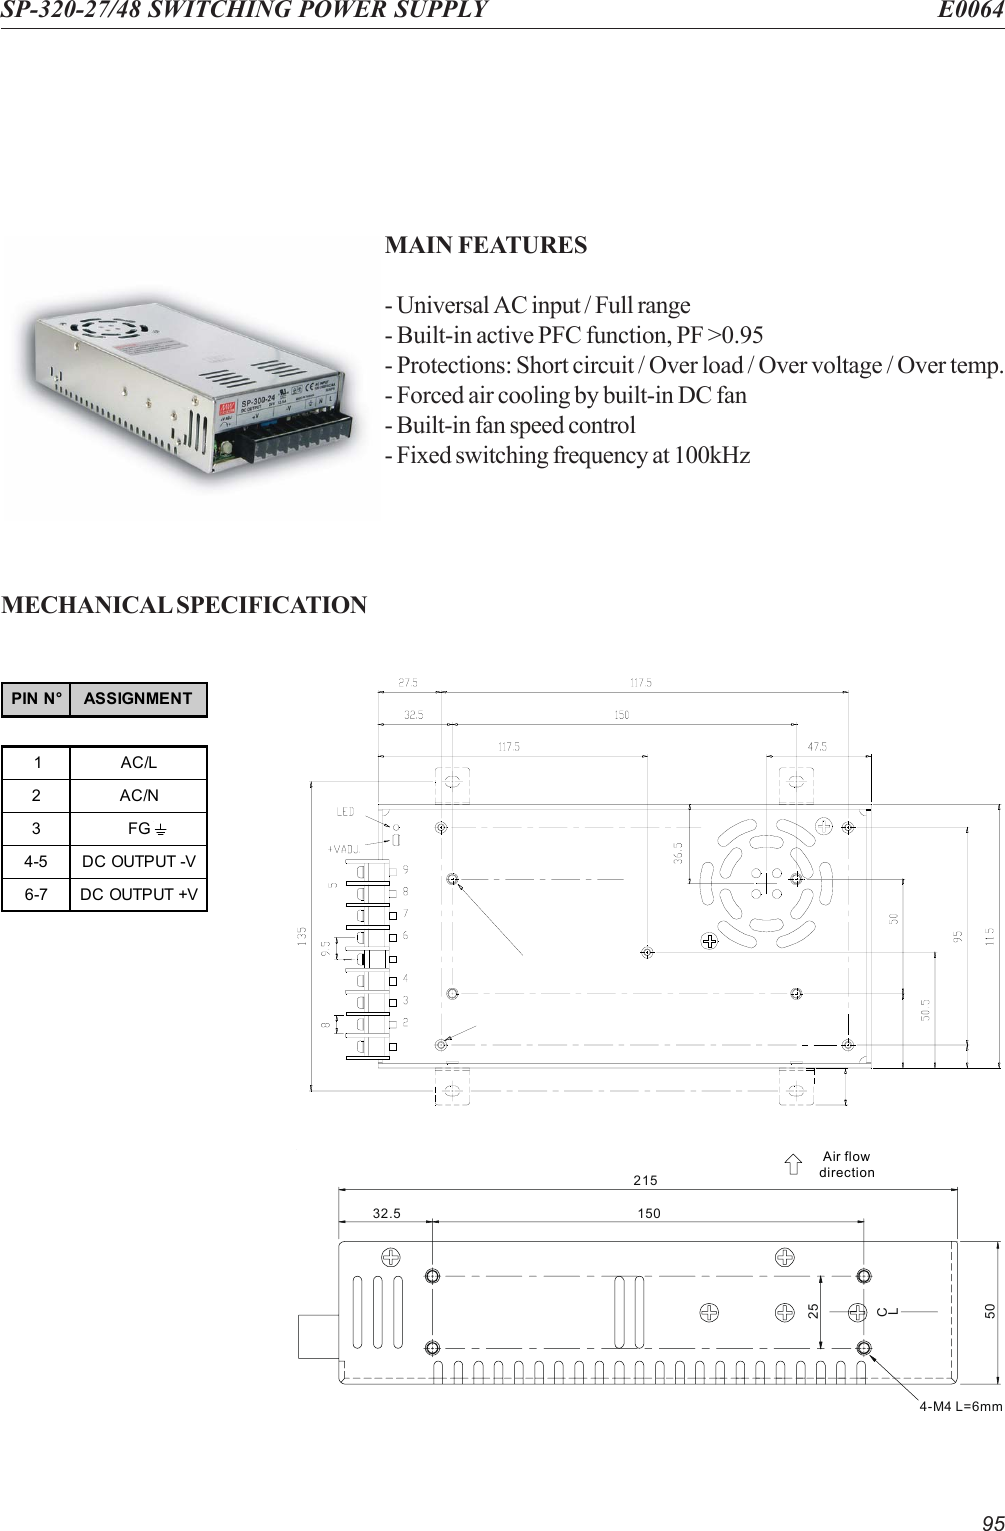 95SP-320-27/48 SWITCHING POWER SUPPLY E0064MAIN FEATURES- Universal AC input / Full range- Built-in active PFC function, PF &gt;0.95- Protections: Short circuit / Over load / Over voltage / Over temp.- Forced air cooling by built-in DC fan- Built-in fan speed control- Fixed switching frequency at 100kHzMECHANICAL SPECIFICATIONAir flowdirection21532.550254-M4 L=6mm150CLPIN N° ASSIGNMENT1AC/L2AC/N3FG4-5 DC OUTPUT -V6-7 DC OUTPUT +V